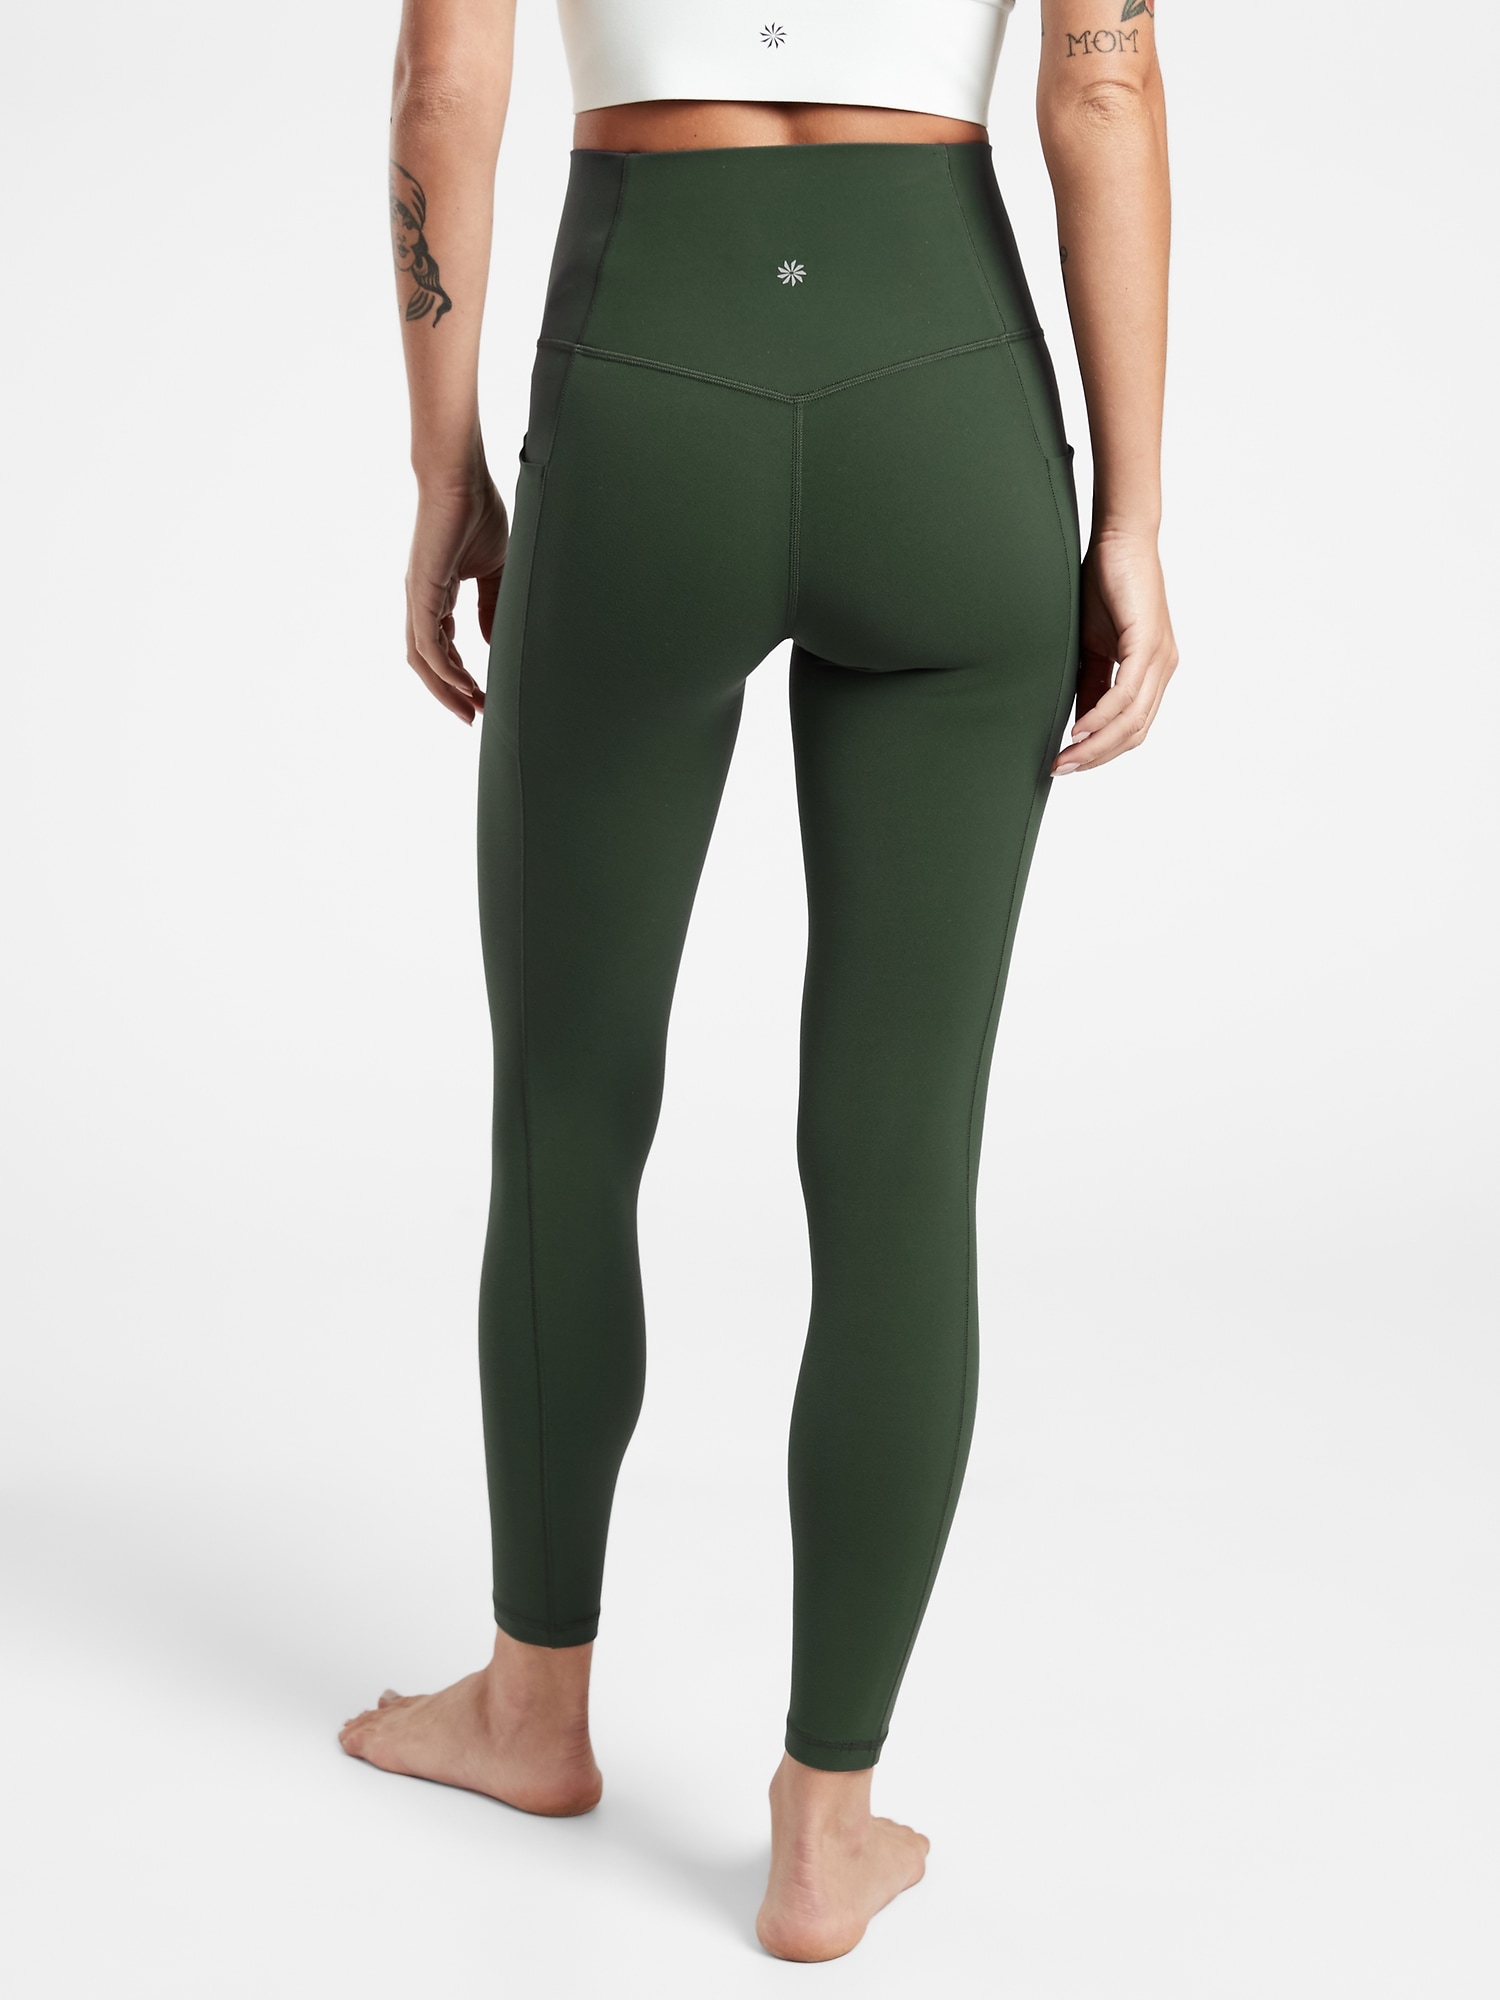 Gooi huichelarij Verandering 25 Best Yoga Brands to Wear On and Off the Mat (for Clothing and Gear) -  The Yoga Nomads